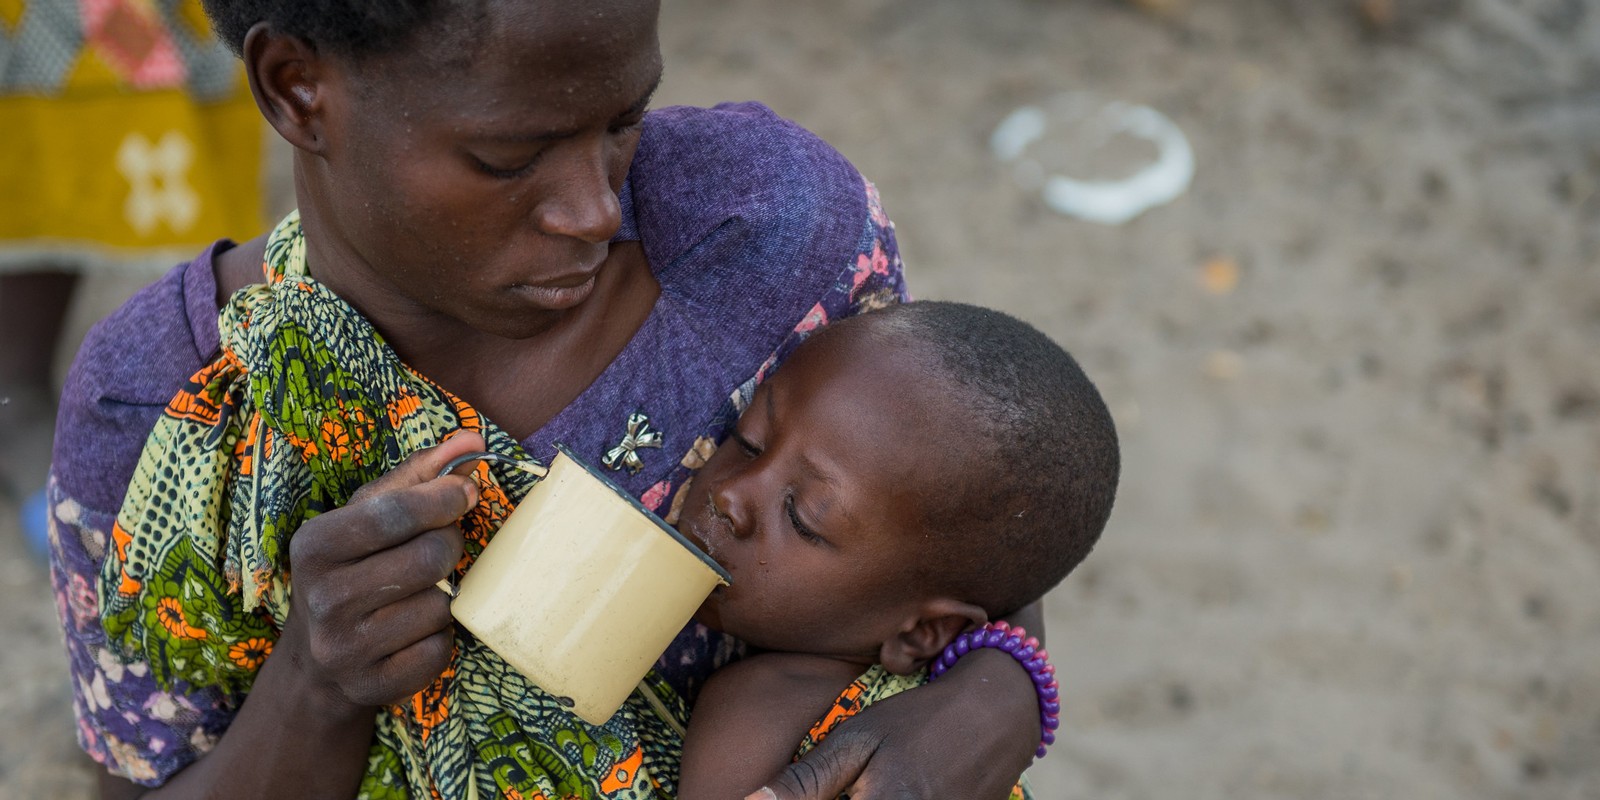 A mother holds a cup feeding her malnourished child in Mwandi, Zambia in 2019.